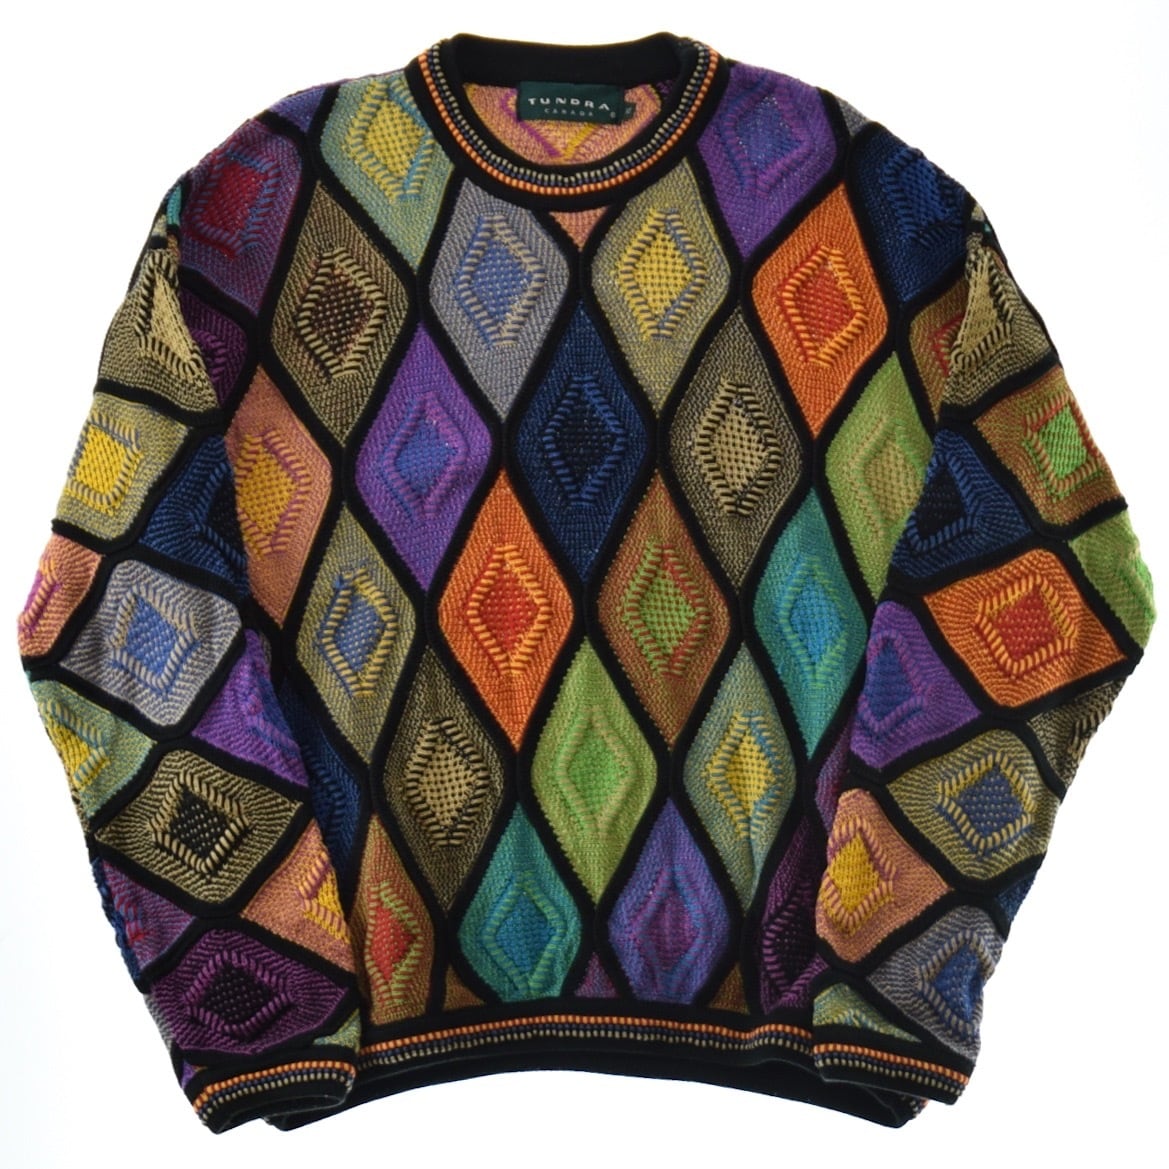 's "TUNDRA" Vintage 3D Knit Sweater Oversize Made In CANADA XL